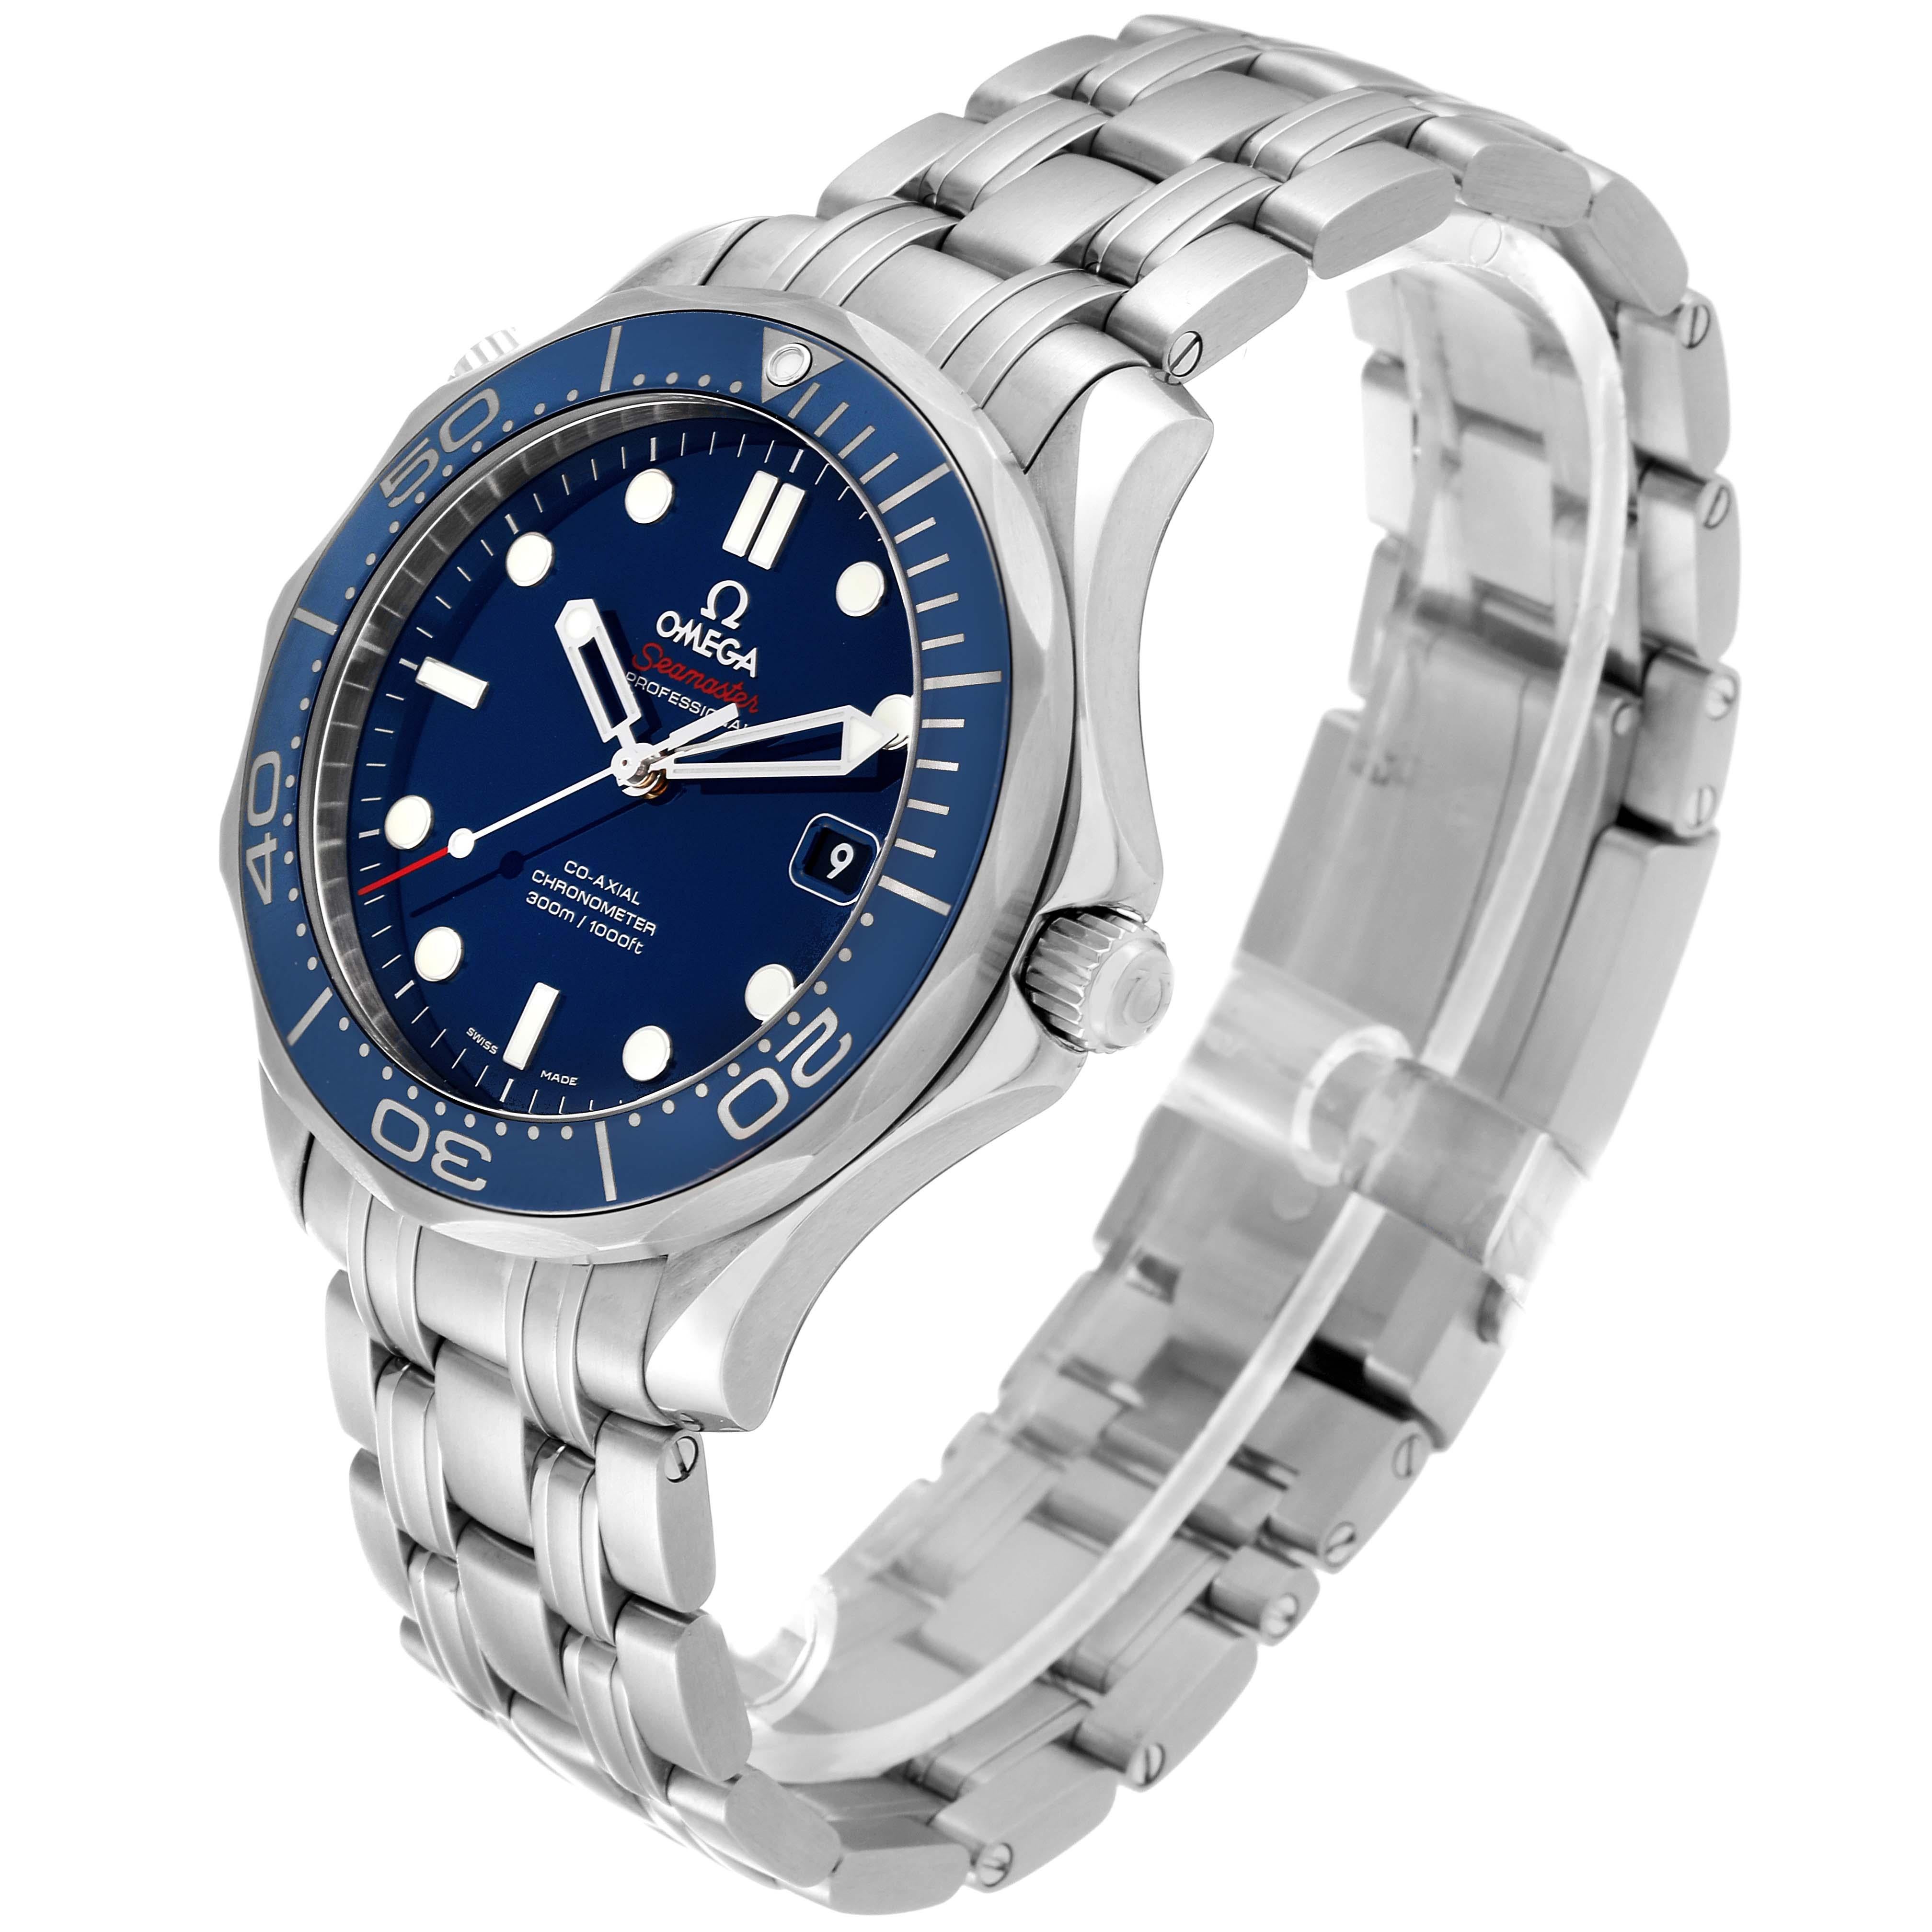 Omega Seamaster Diver 300M Steel Mens Watch 212.30.41.20.03.001 Box Card 3